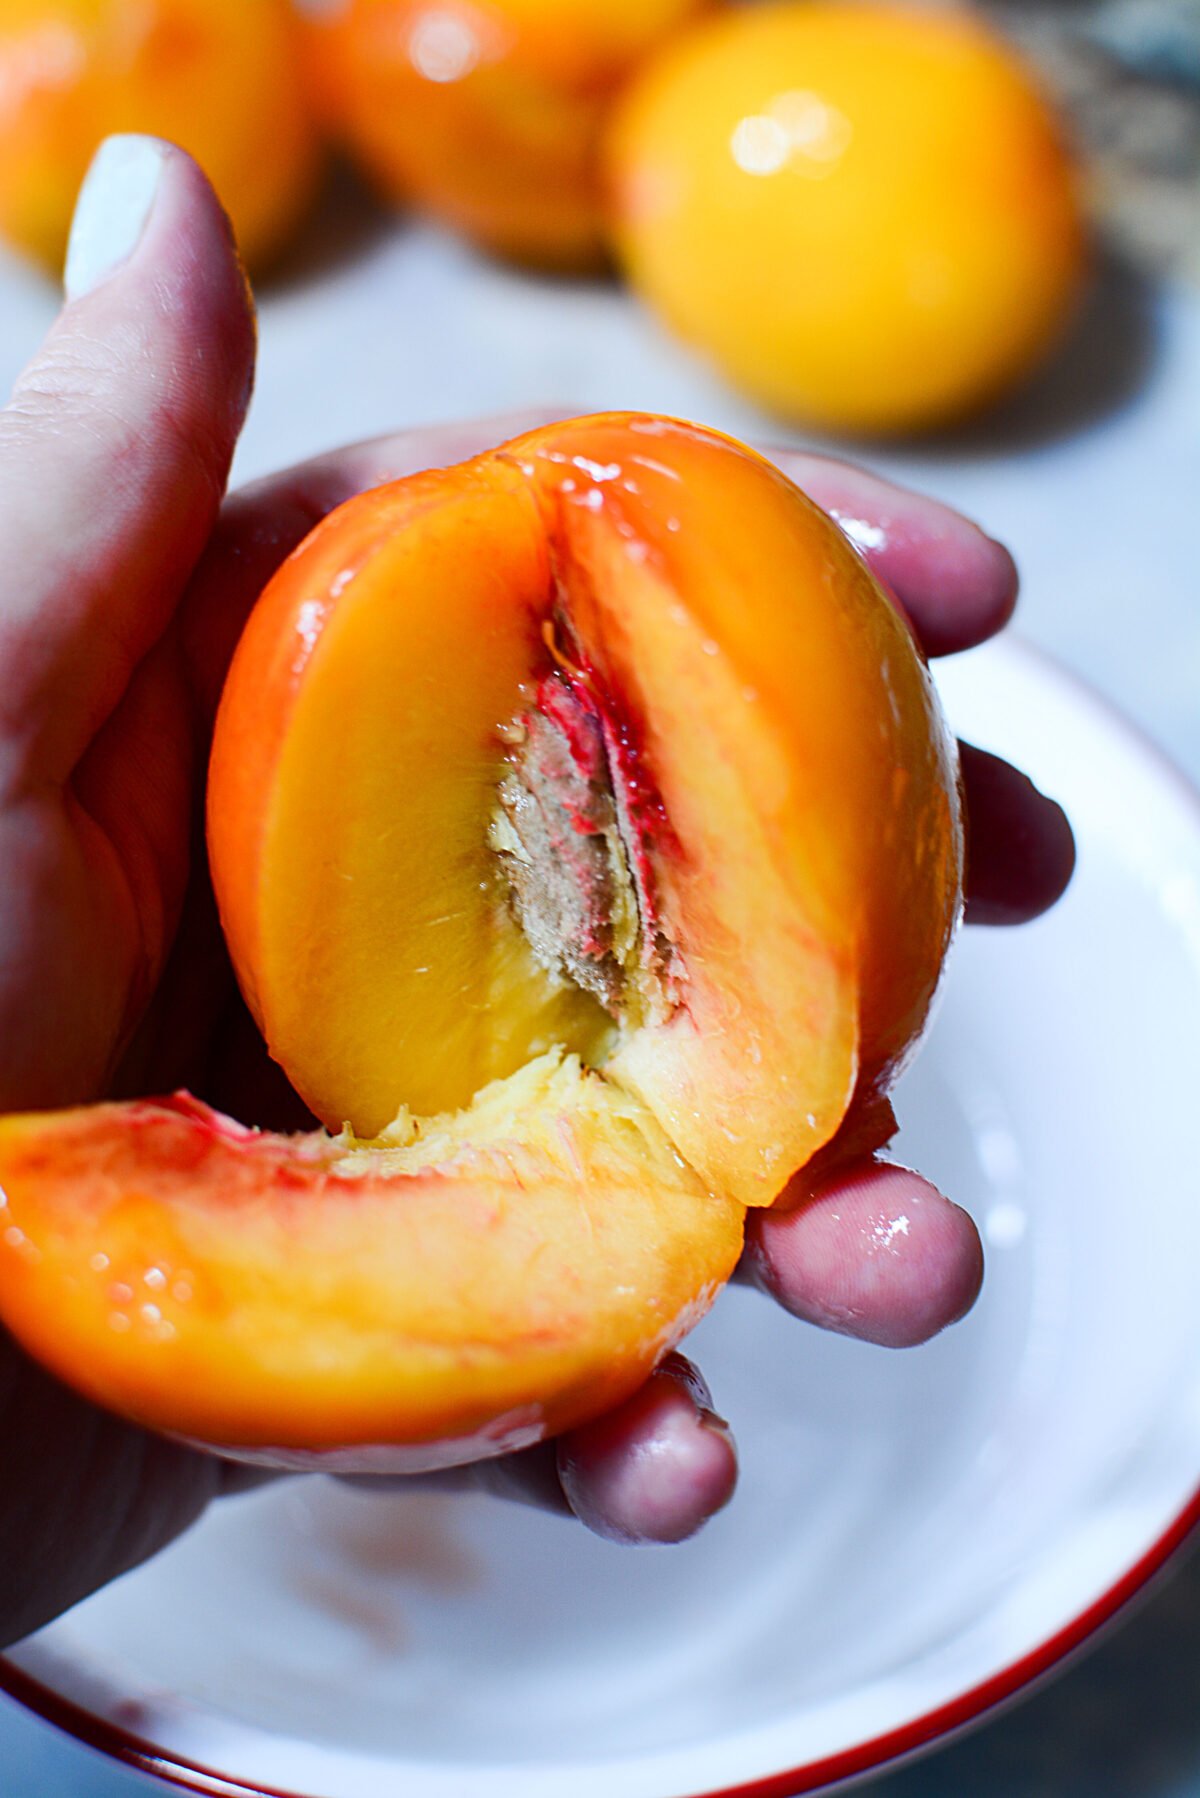 A peach being sliced into sections.